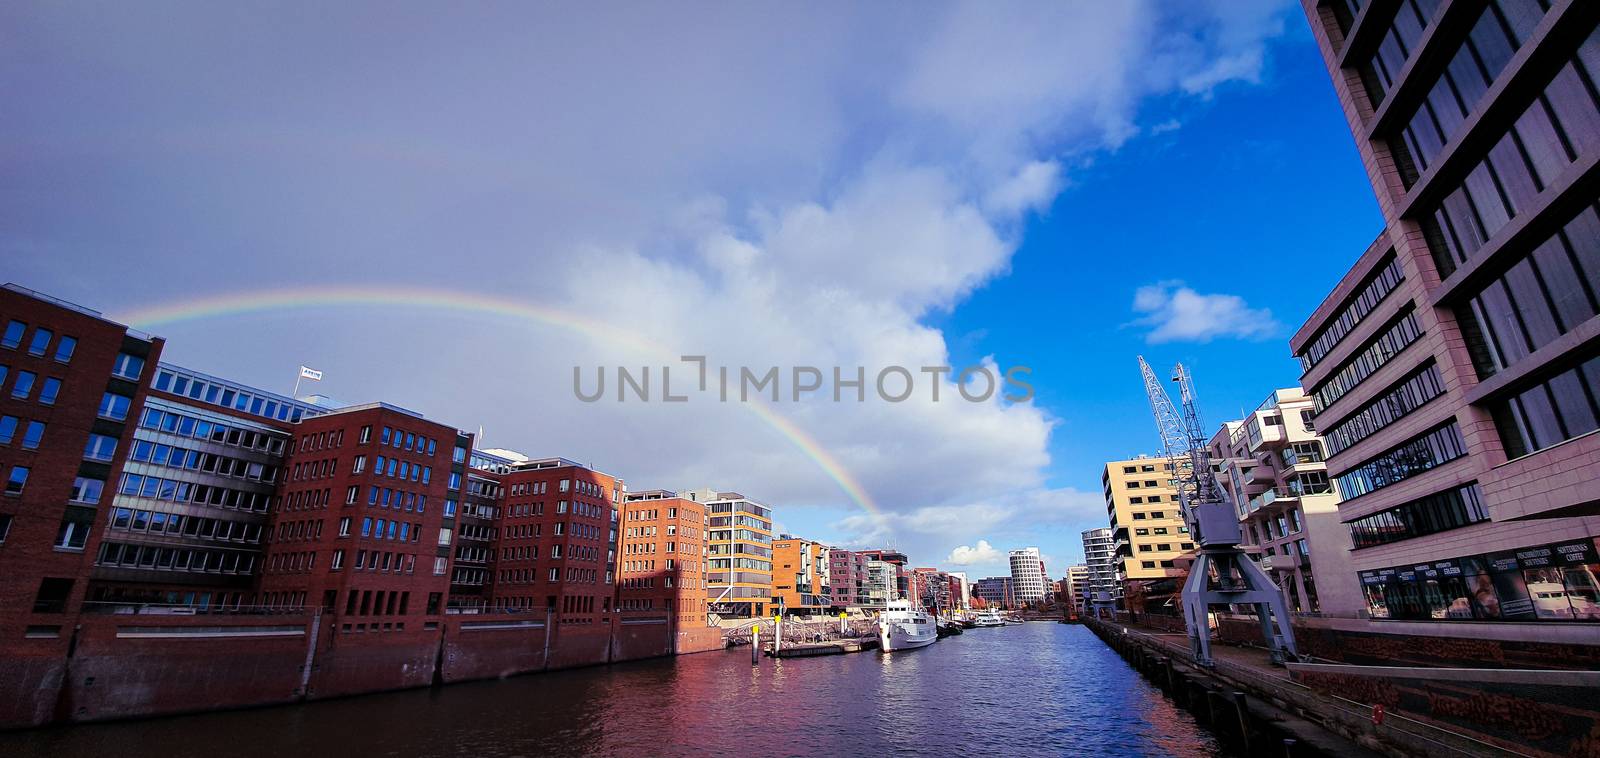 Beautiful rainbow over Hamburg canal. Beautiful wide angle view from the Kaiserkai bridge on the water canal at the Speicherstadt warehouse district near the Elbphilharmony concert hall. Buildings constructed with steel and brick.